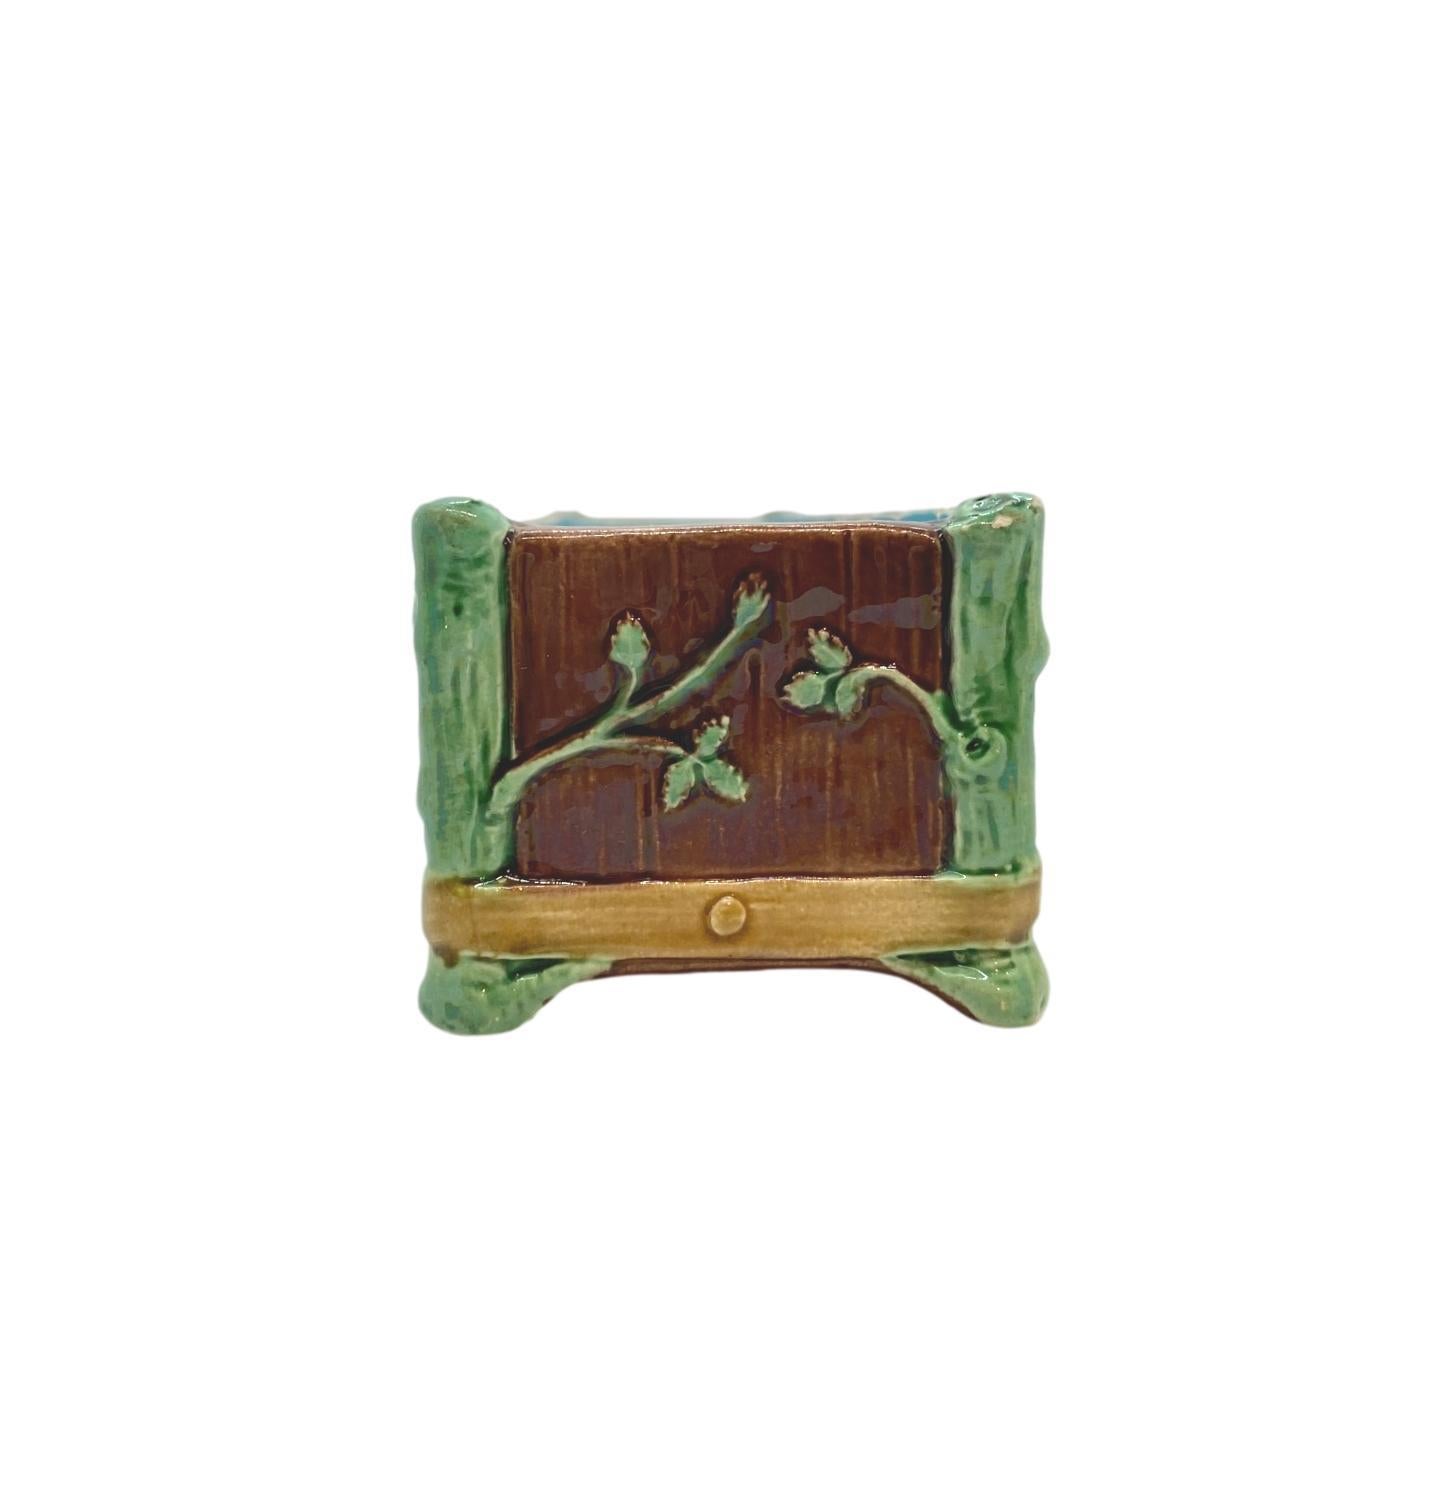 English Minton Majolica Small Jardinière Flower Trough Singed, Dated 1871 For Sale